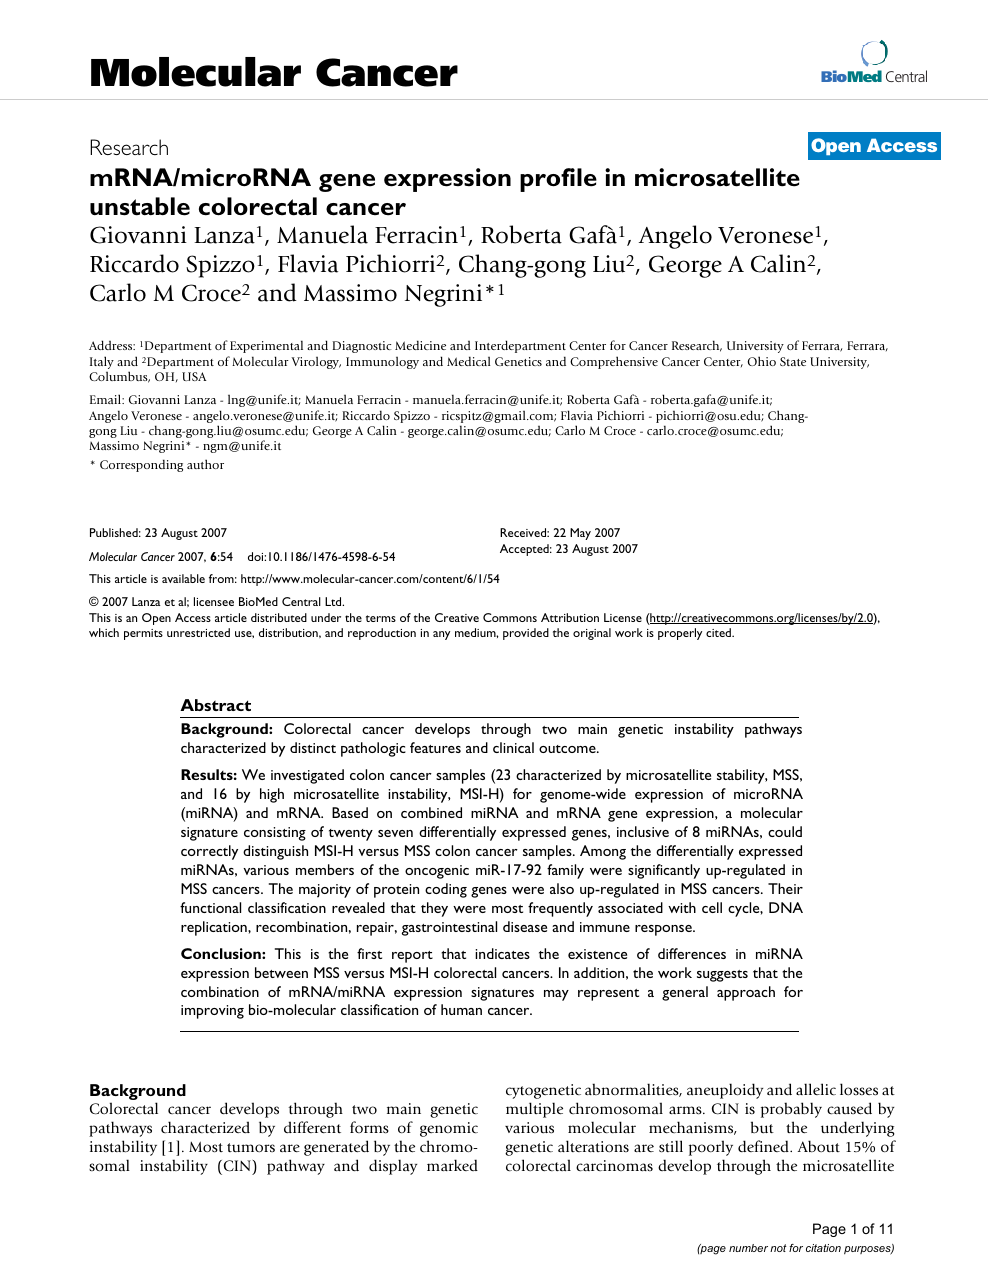 Mrna Microrna Gene Expression Profile In Microsatellite Unstable Colorectal Cancer Topic Of Research Paper In Clinical Medicine Download Scholarly Article Pdf And Read For Free On Cyberleninka Open Science Hub